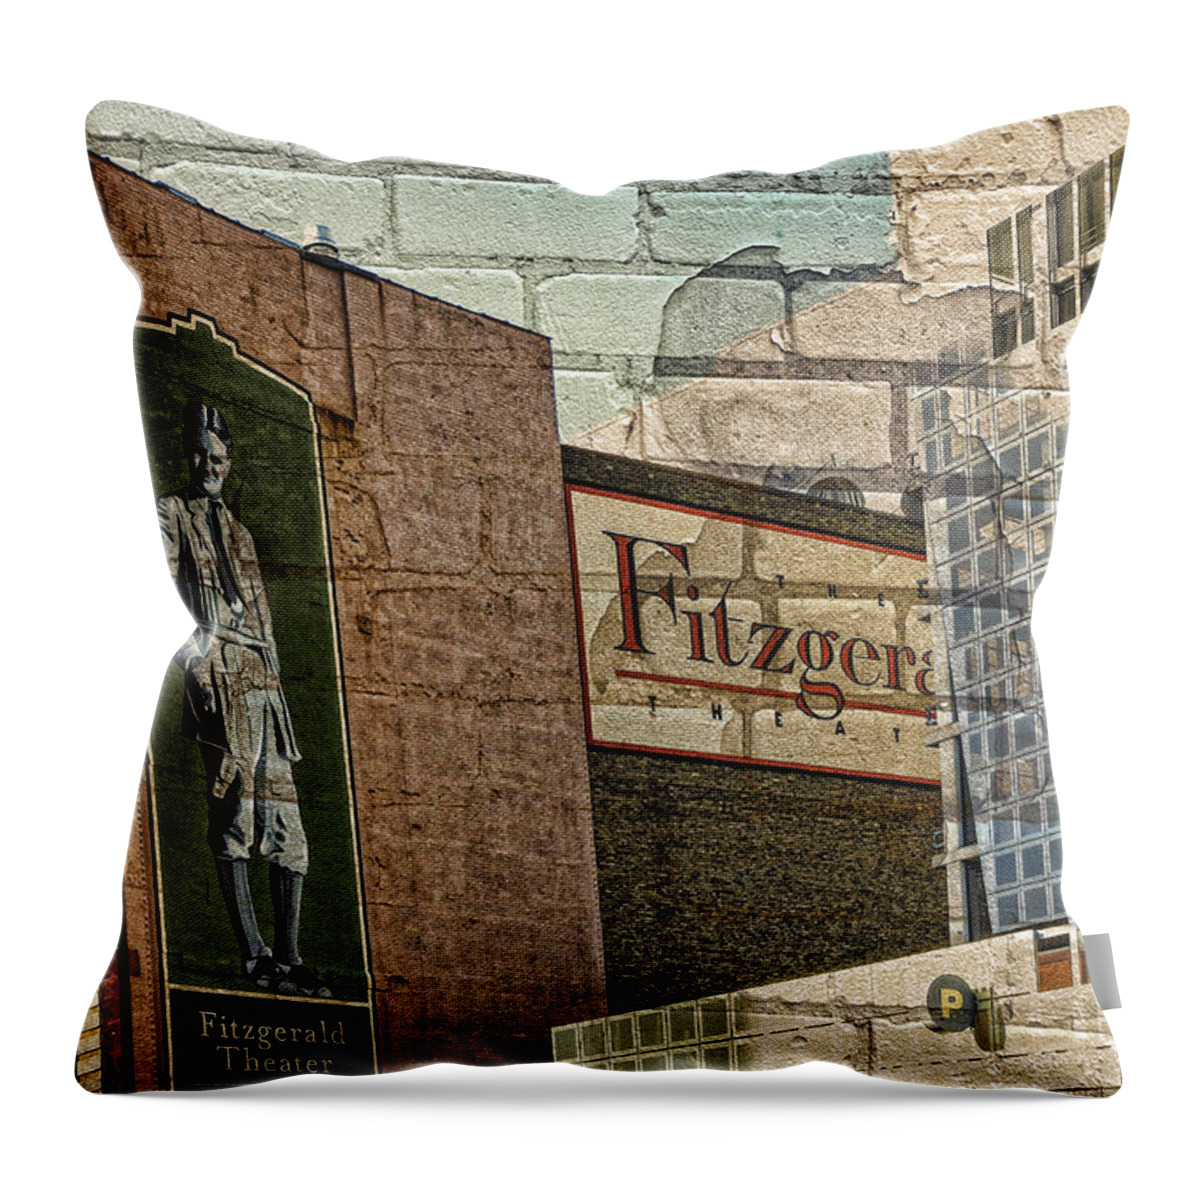 Minnesota Photo Throw Pillow featuring the photograph Fitzgerald Theater St. Paul Minnesota by Susan Stone